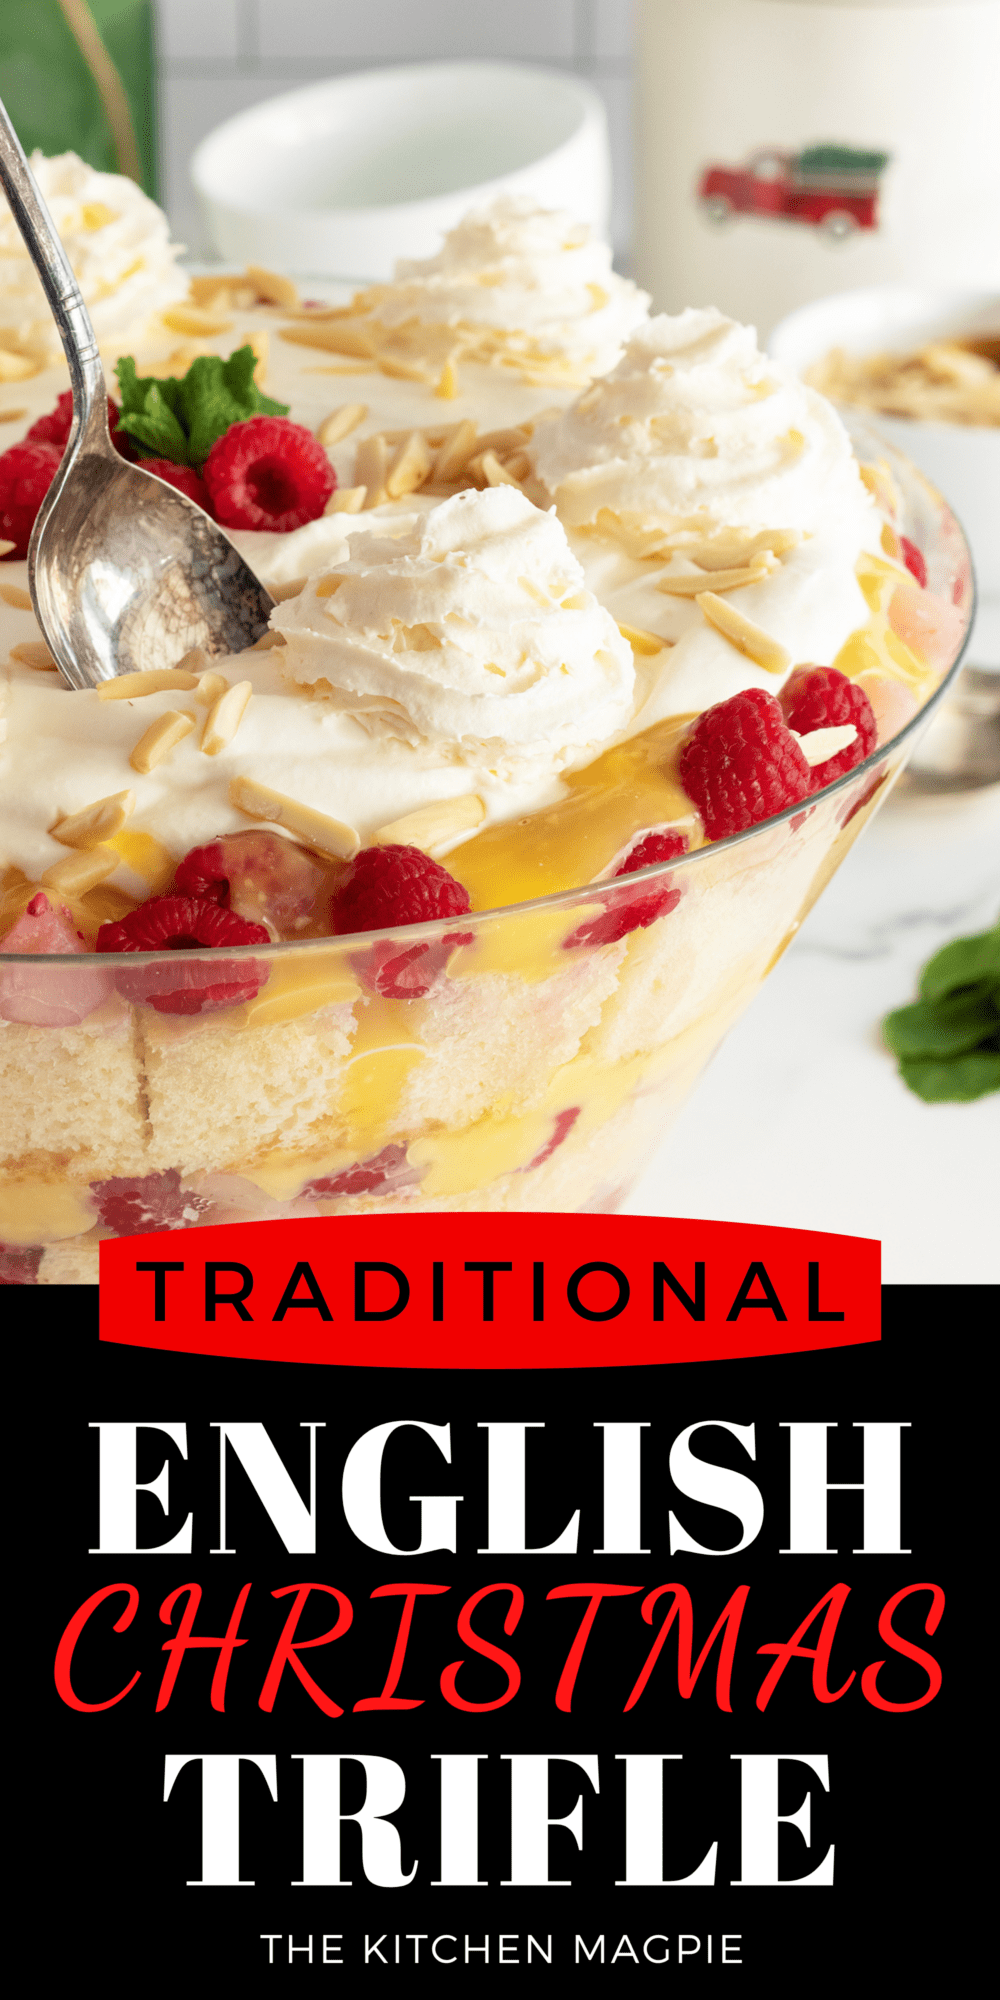 Filled with fruit, white cake and amaretto, custard and whipped cream, English trifle is surprisingly easy to make, it looks amazing when presented at a big dinner.